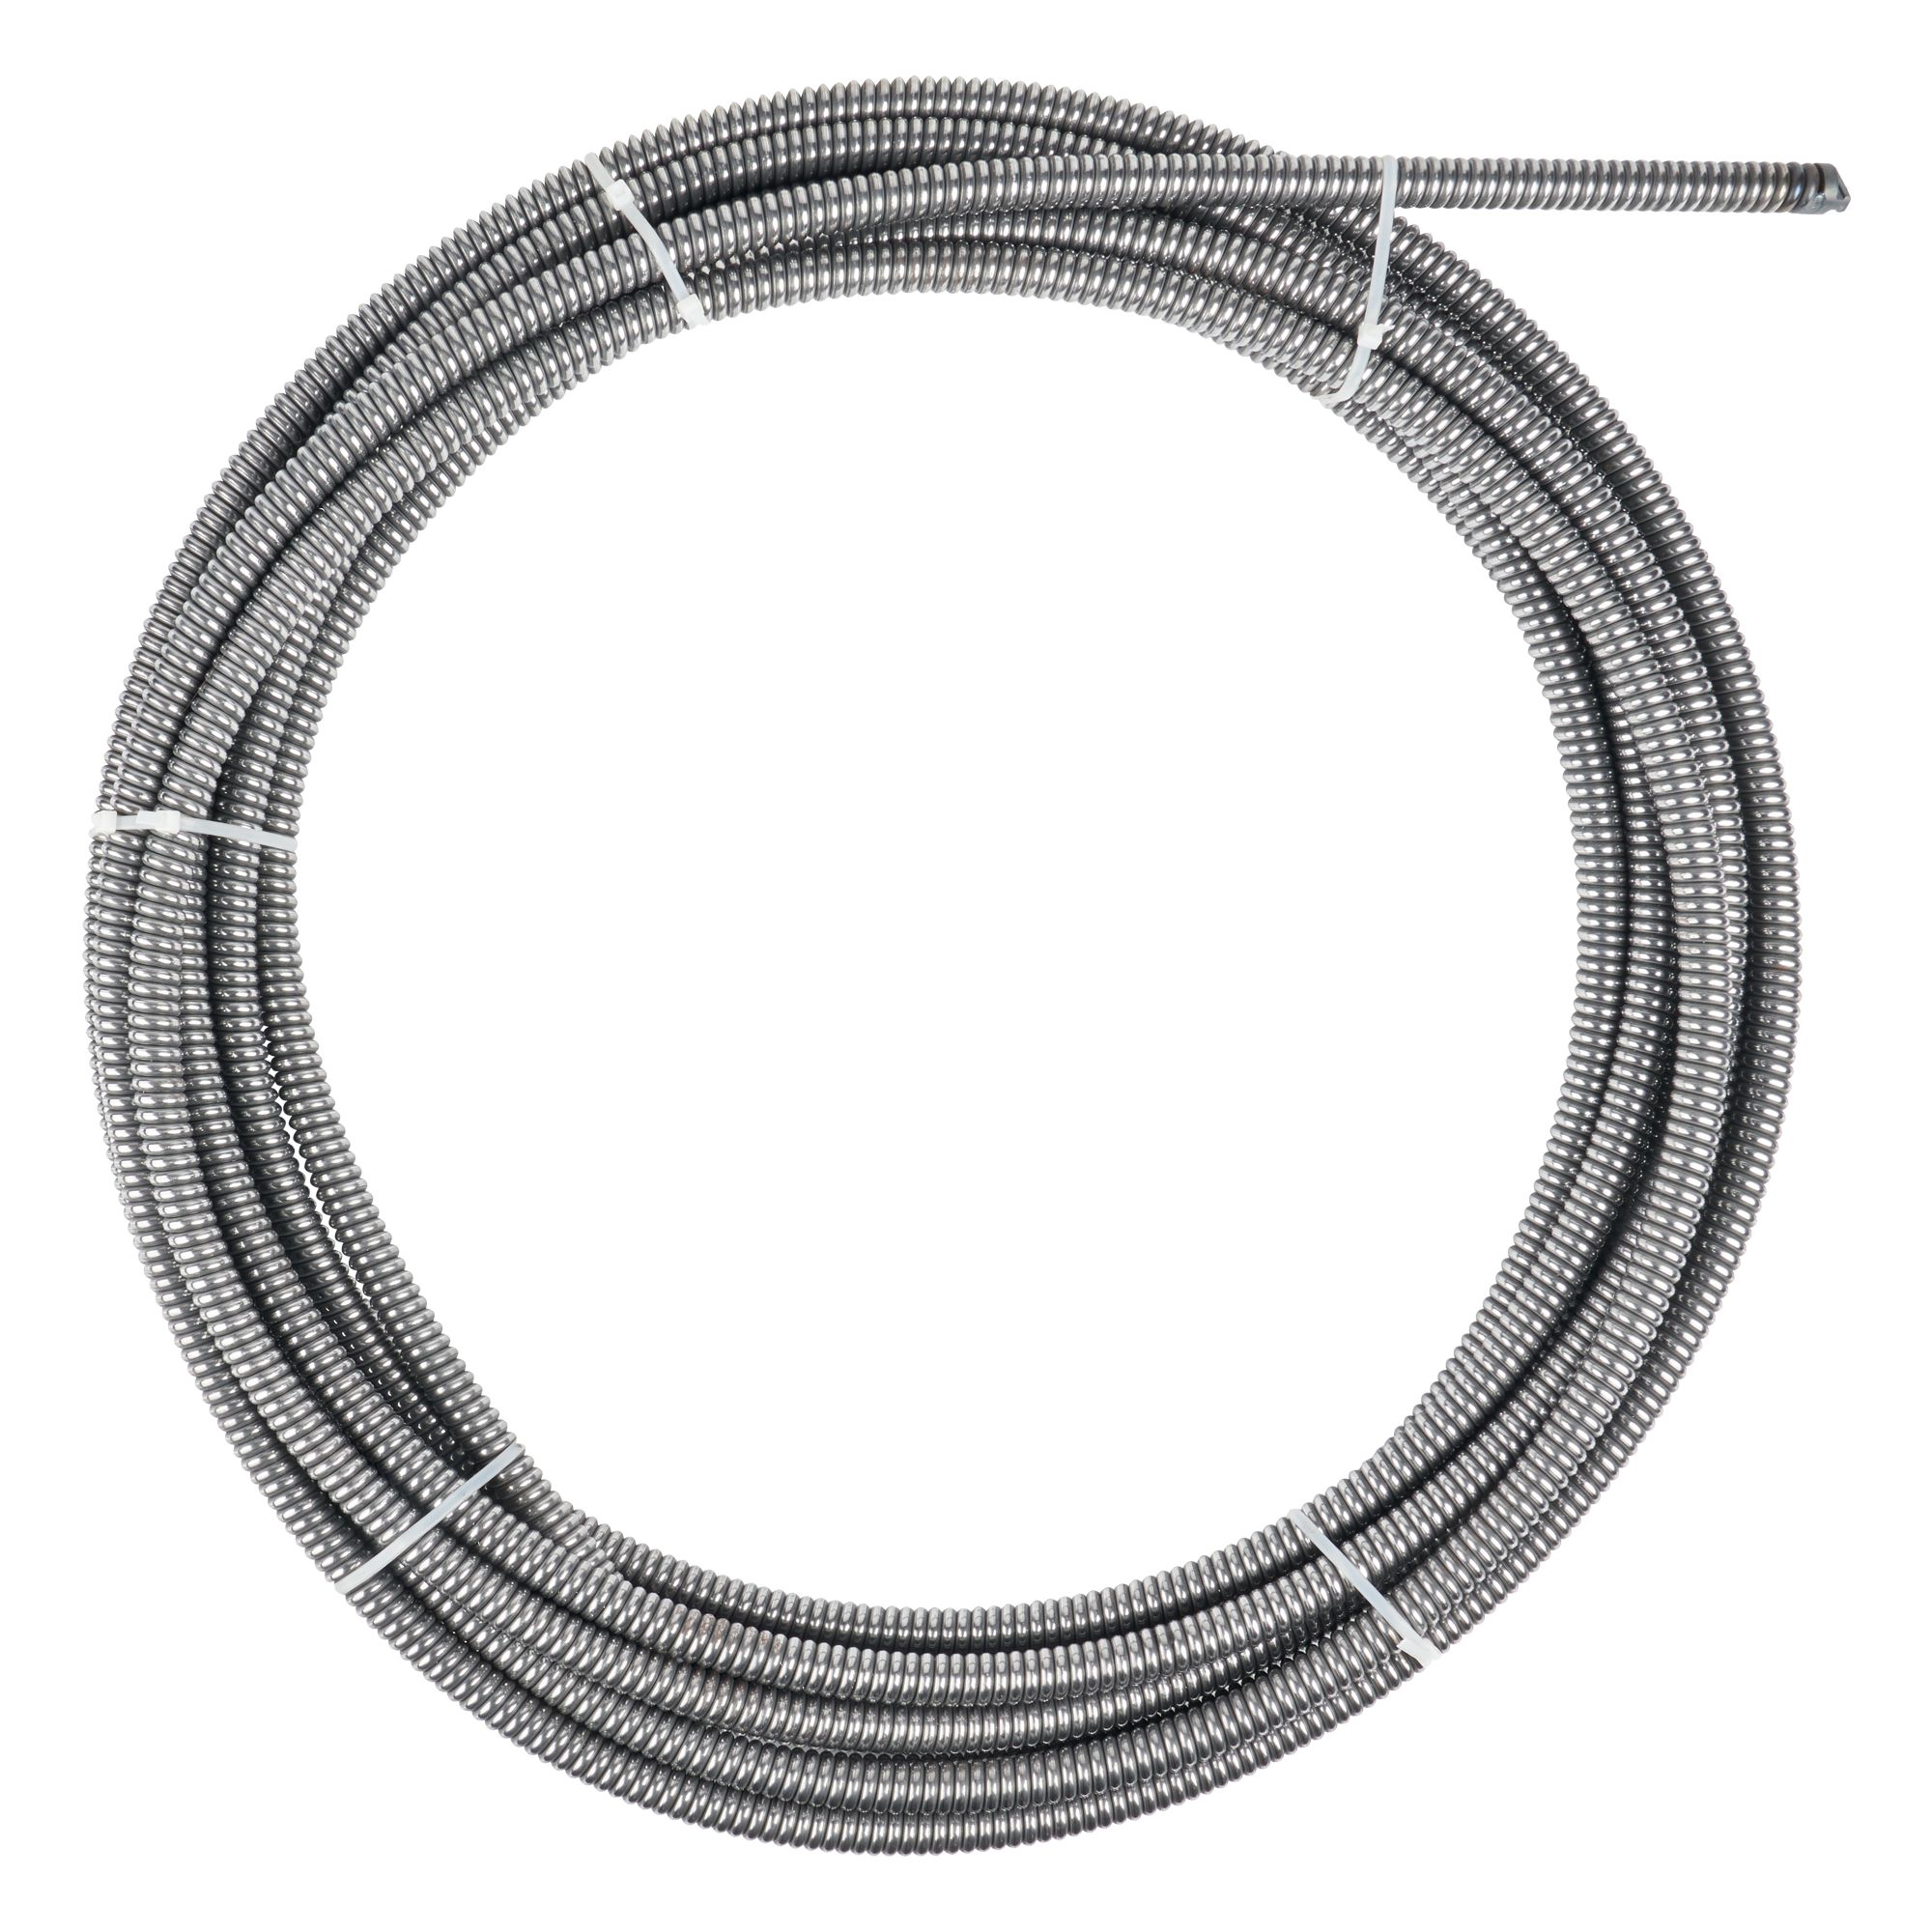 5/8" x 25' Inner Core Drum Cable